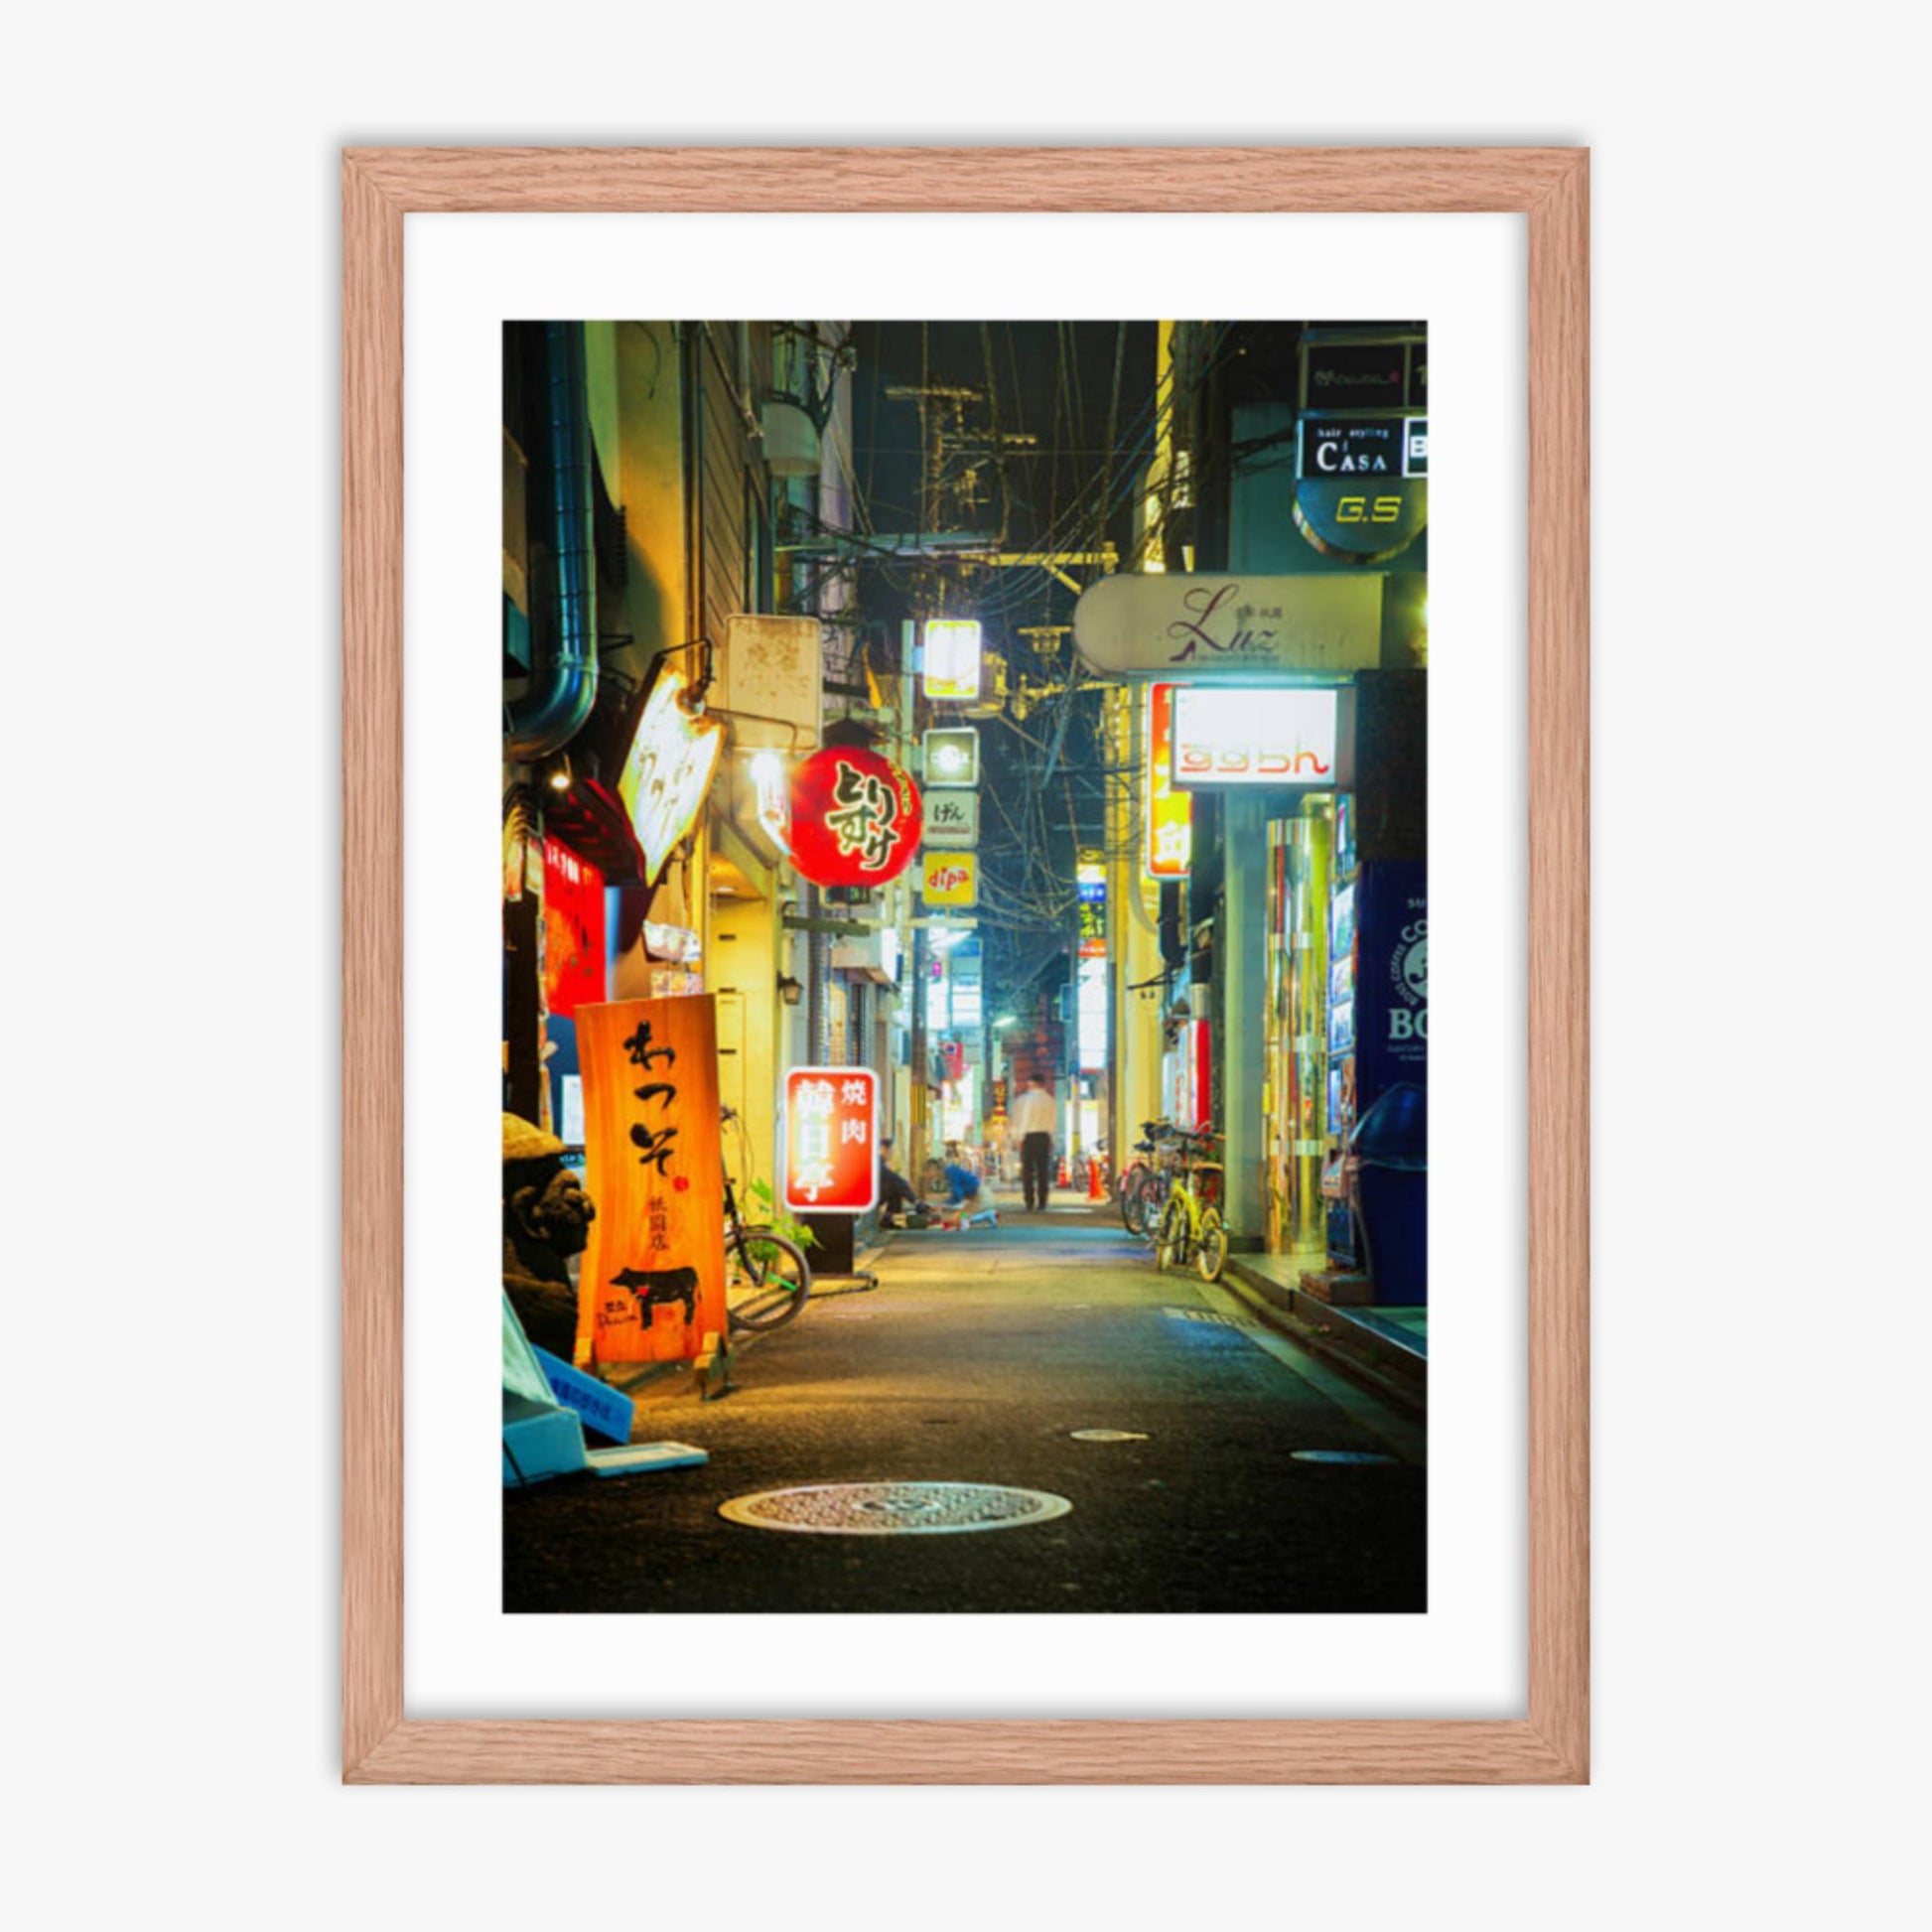 Kyoto, Japan backstreet at night 18x24 in Poster With Oak Frame